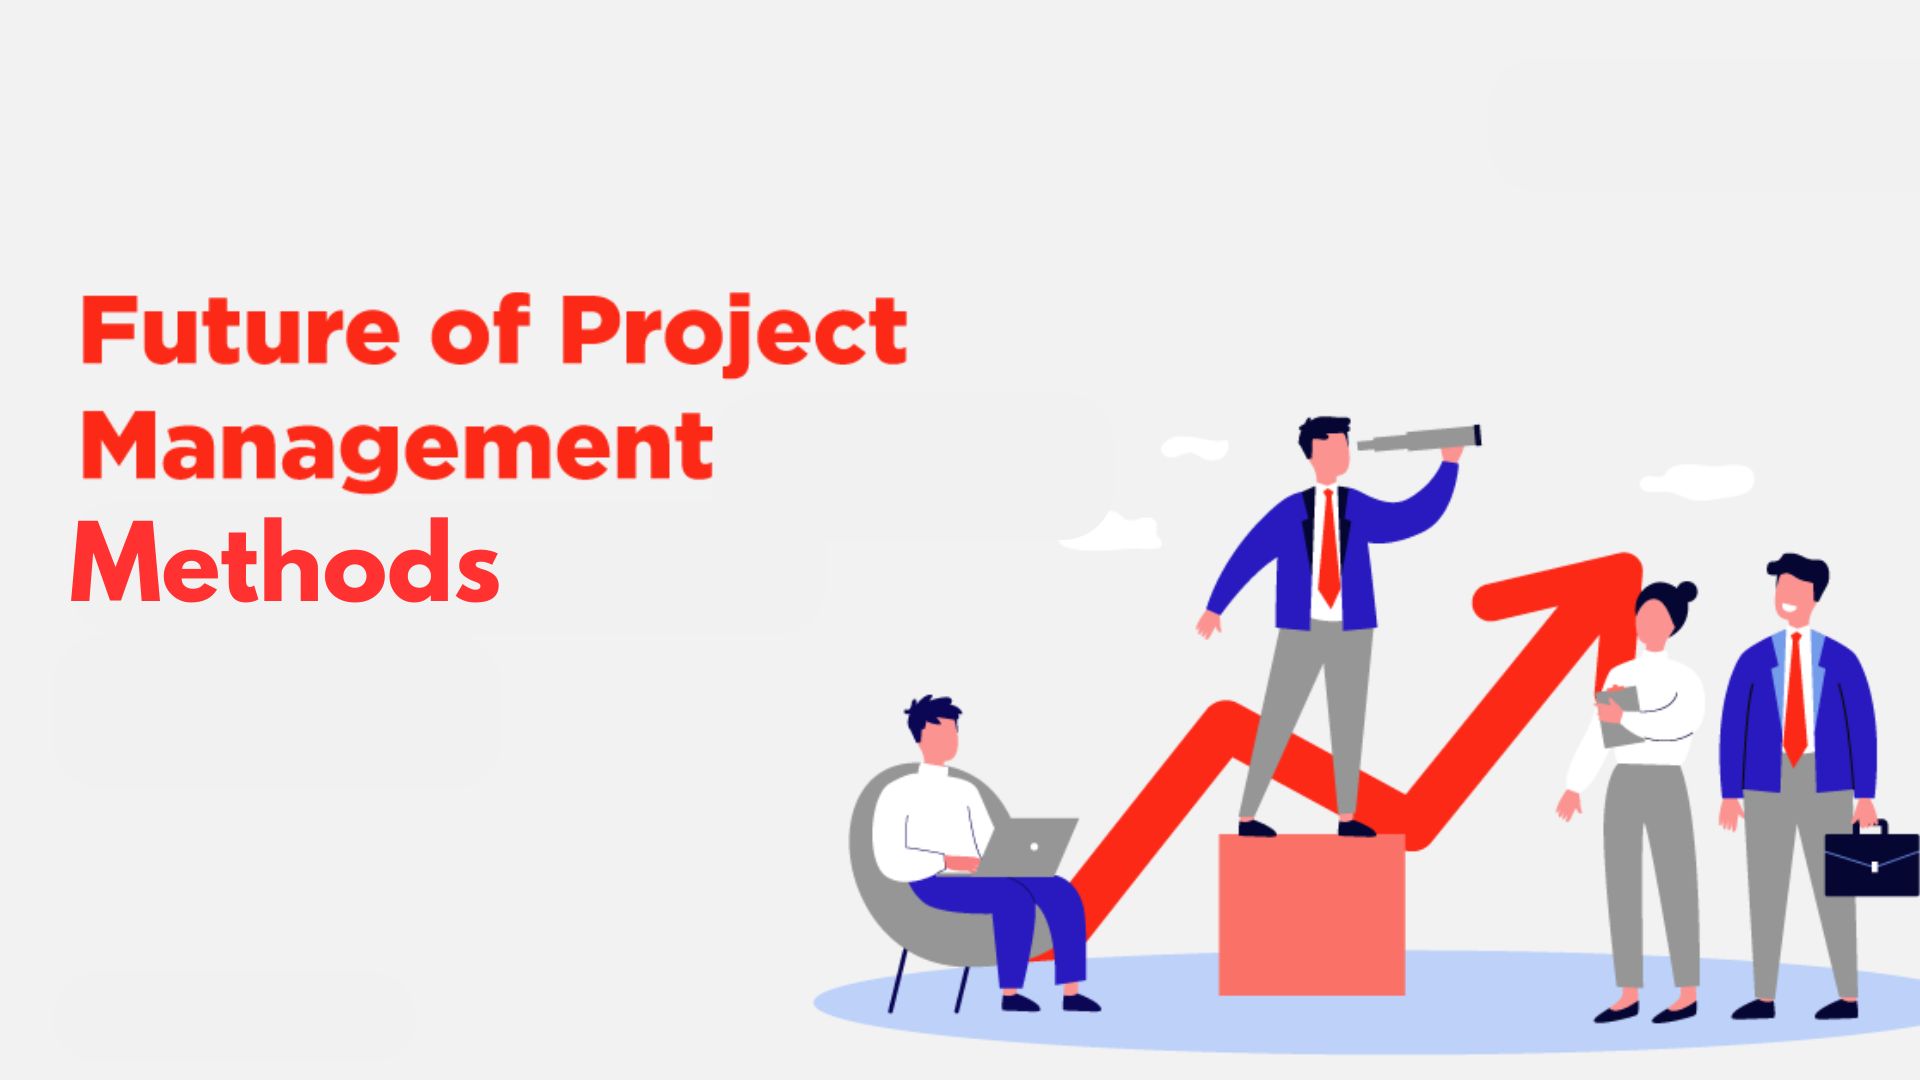 Predicting the Future of Project Management Methods